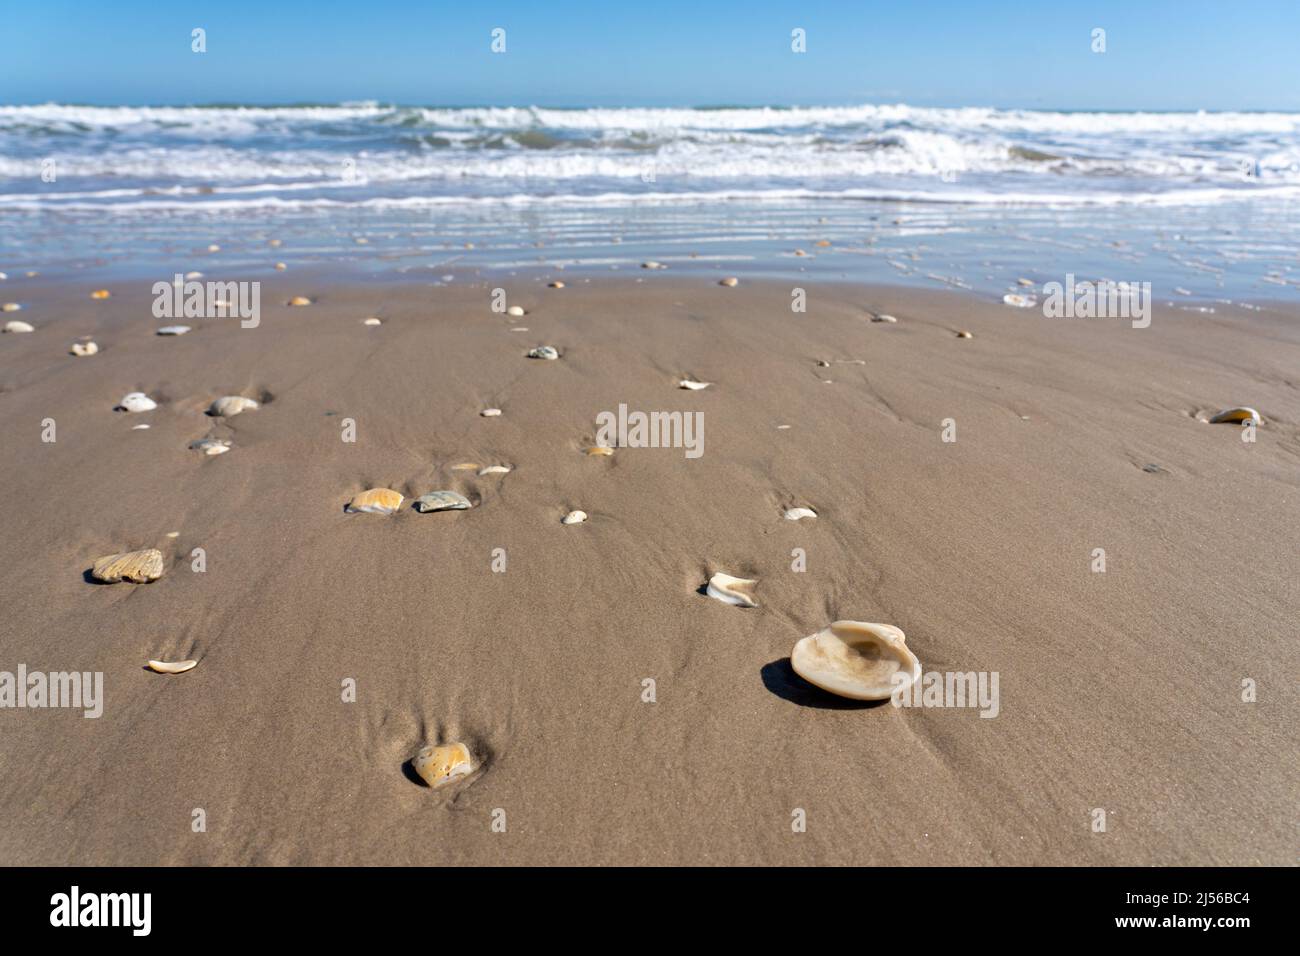 Seashells washed up on the beach by the surf on South Padre Island, Texas.  Most of the shells are single halves of bivalve shells. Stock Photo